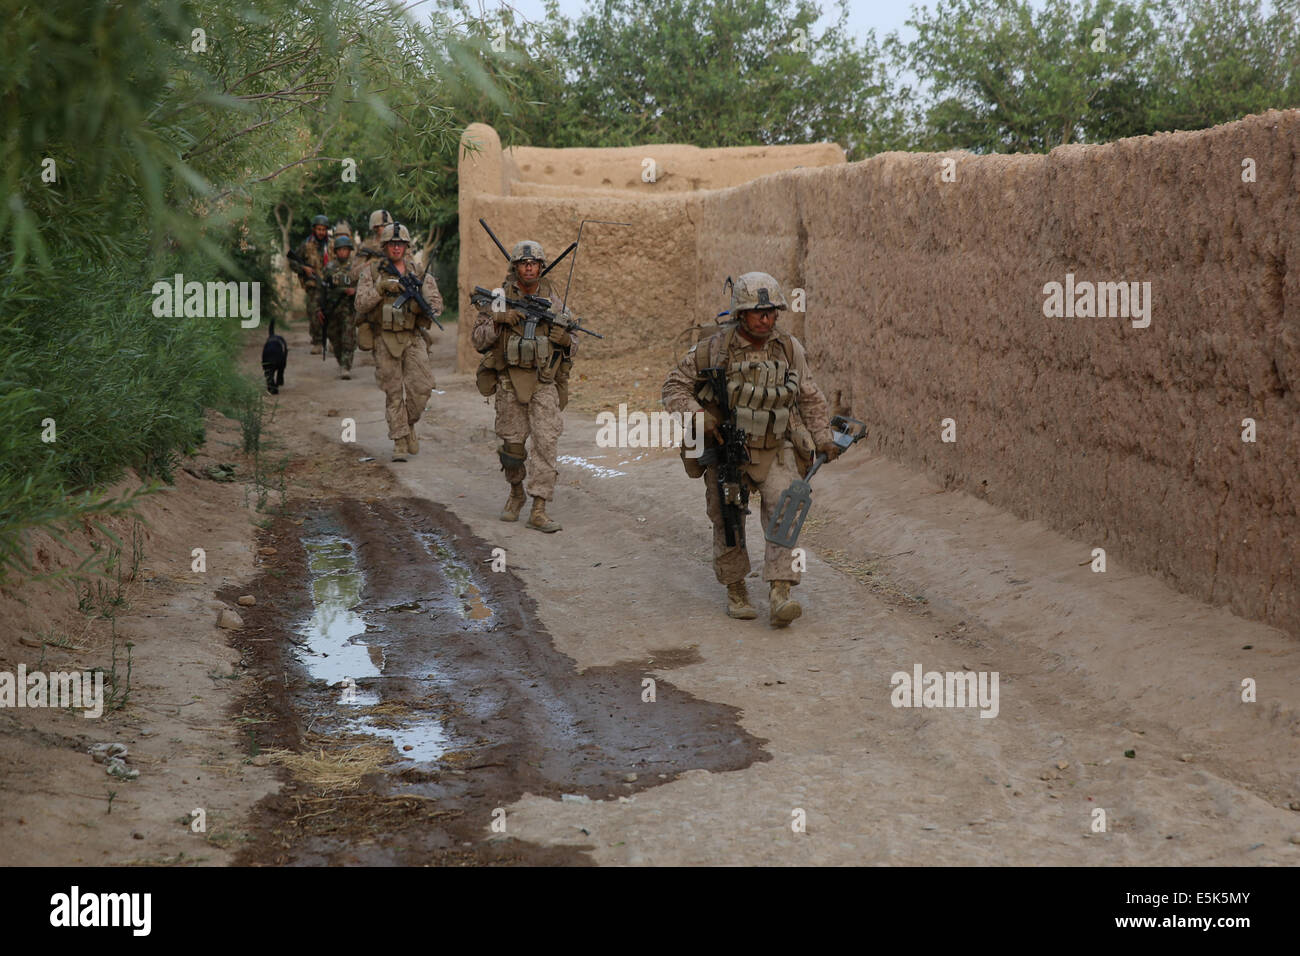 US Marines with the 1st Battalion, 7th Marine Regiment, patrol along a village wall during a mission July 4, 2014 in Gereshk,  Helmand province, Afghanistan. Stock Photo